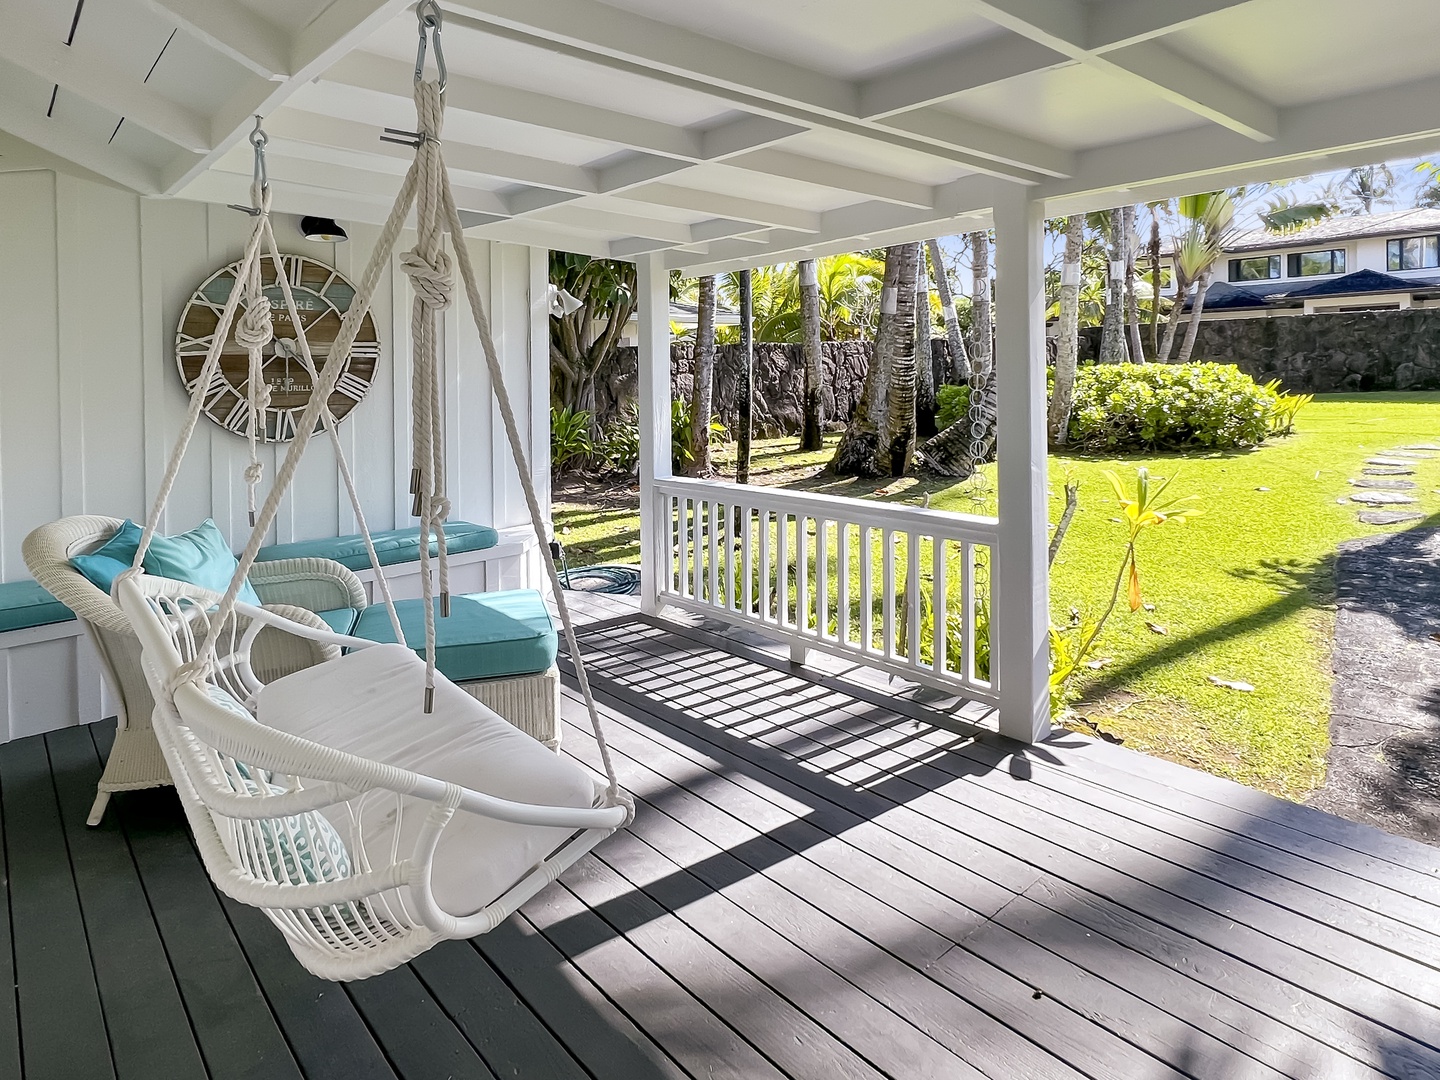 Kailua Vacation Rentals, Kai Mele - There's plenty of seating and a porch swing